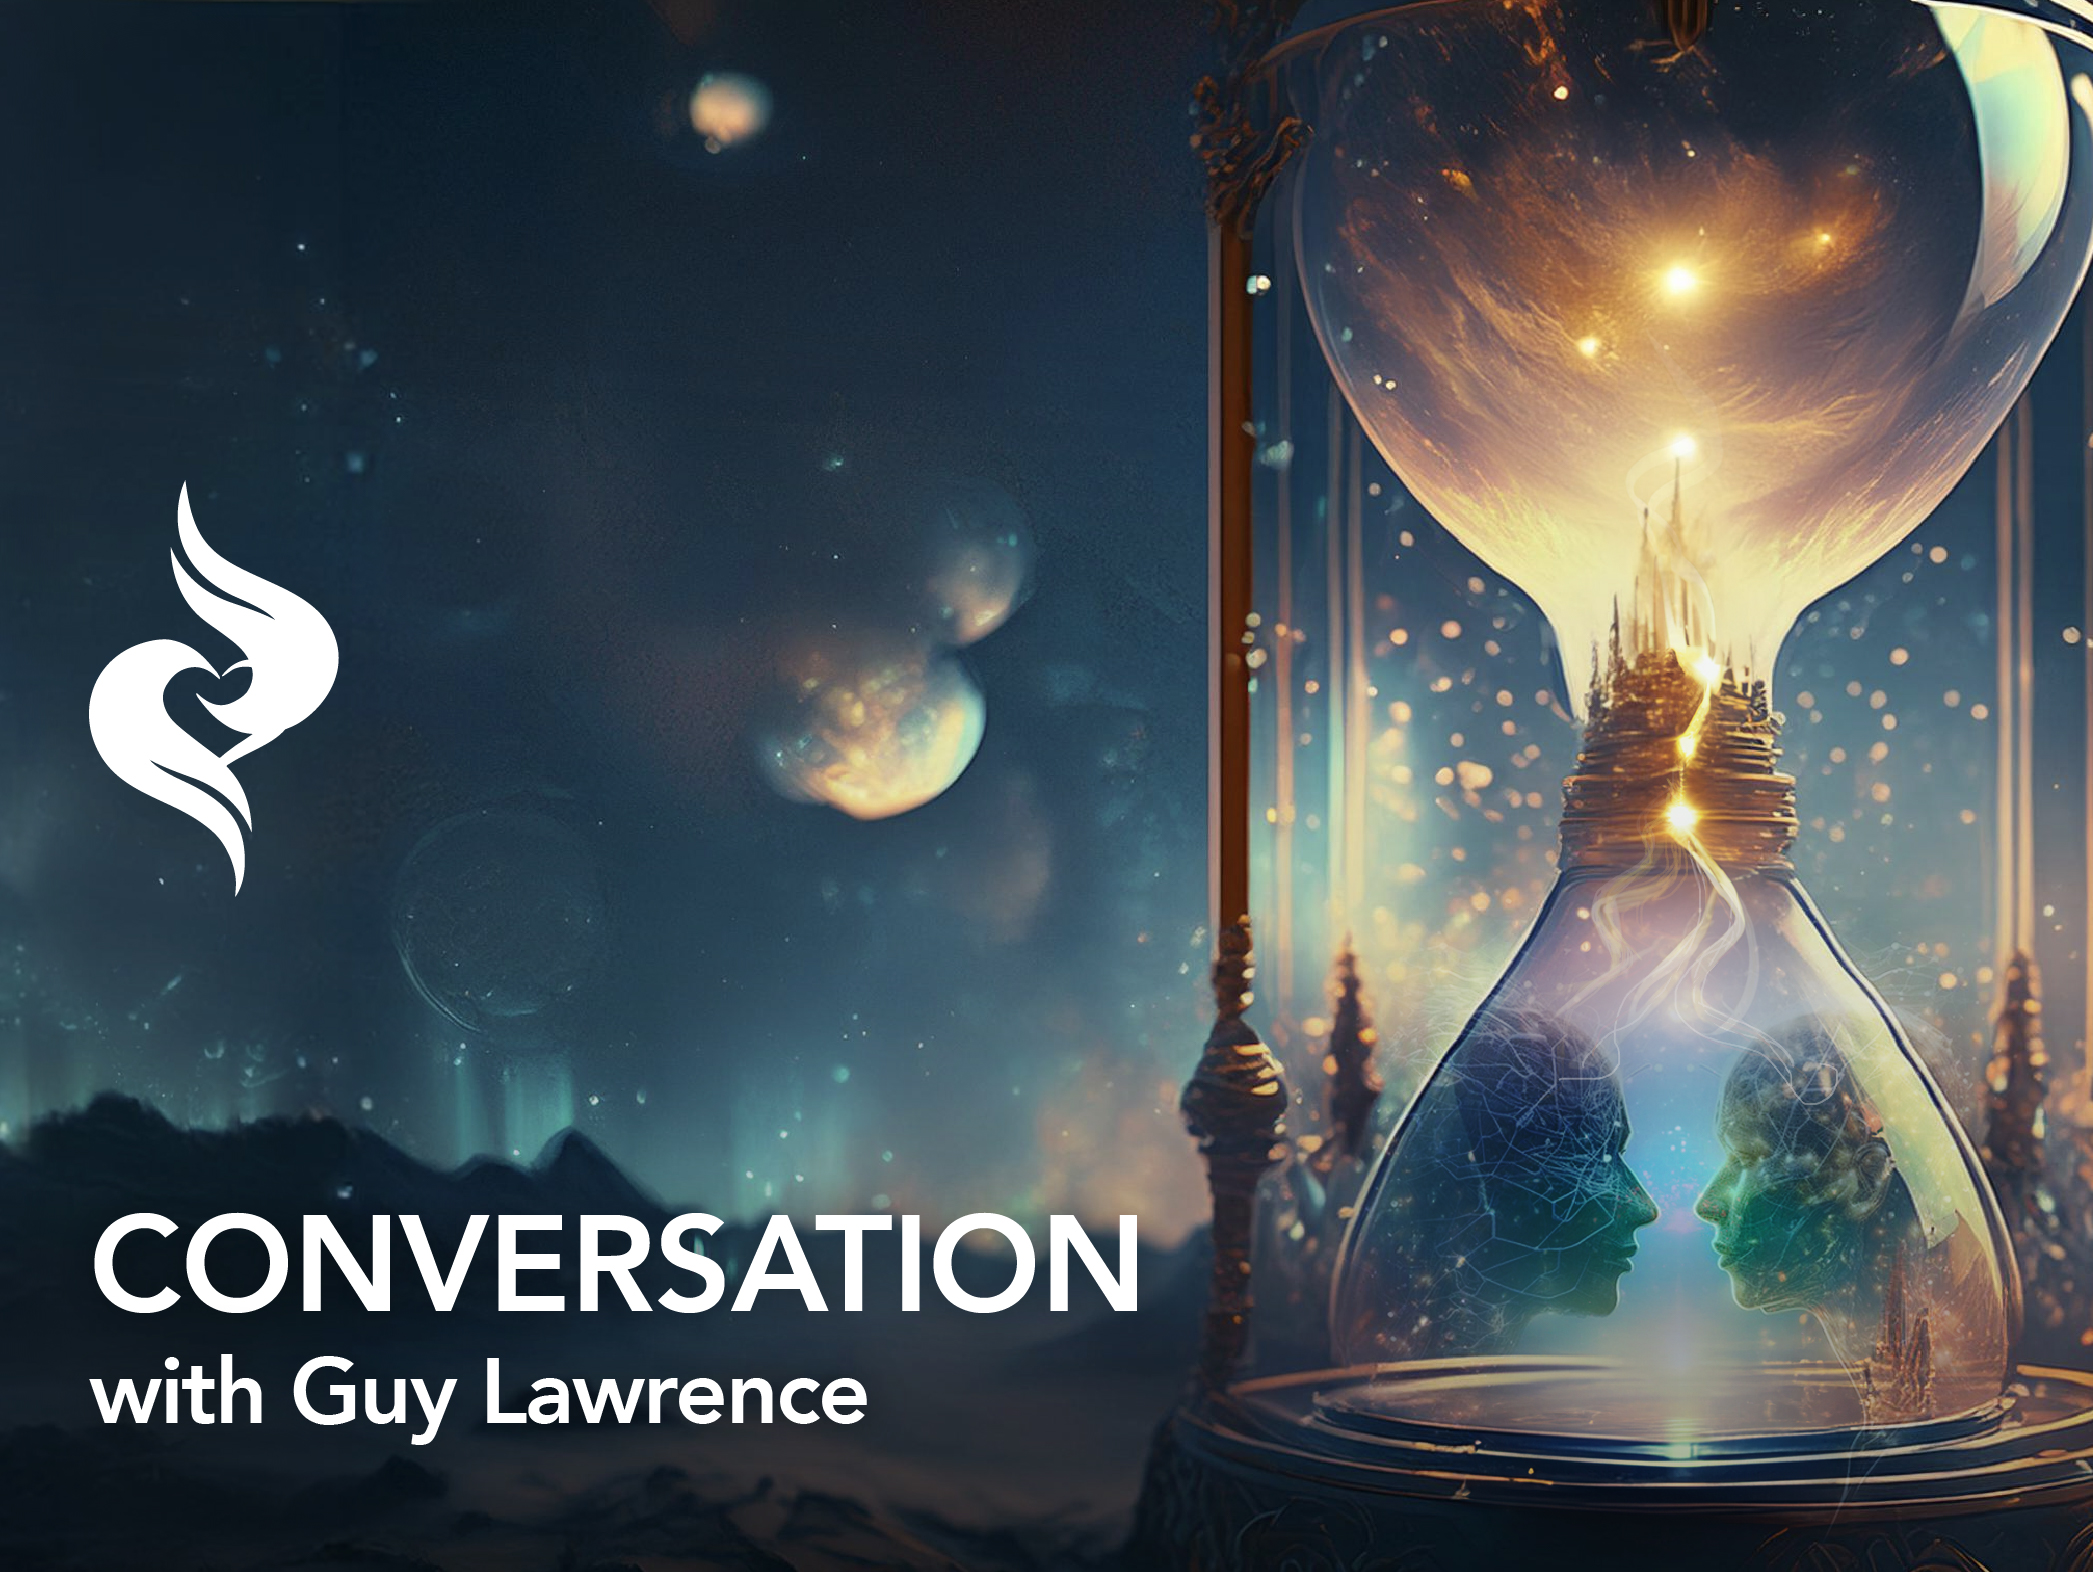 Jim Self joins Guy Lawrence on Let It In podcast